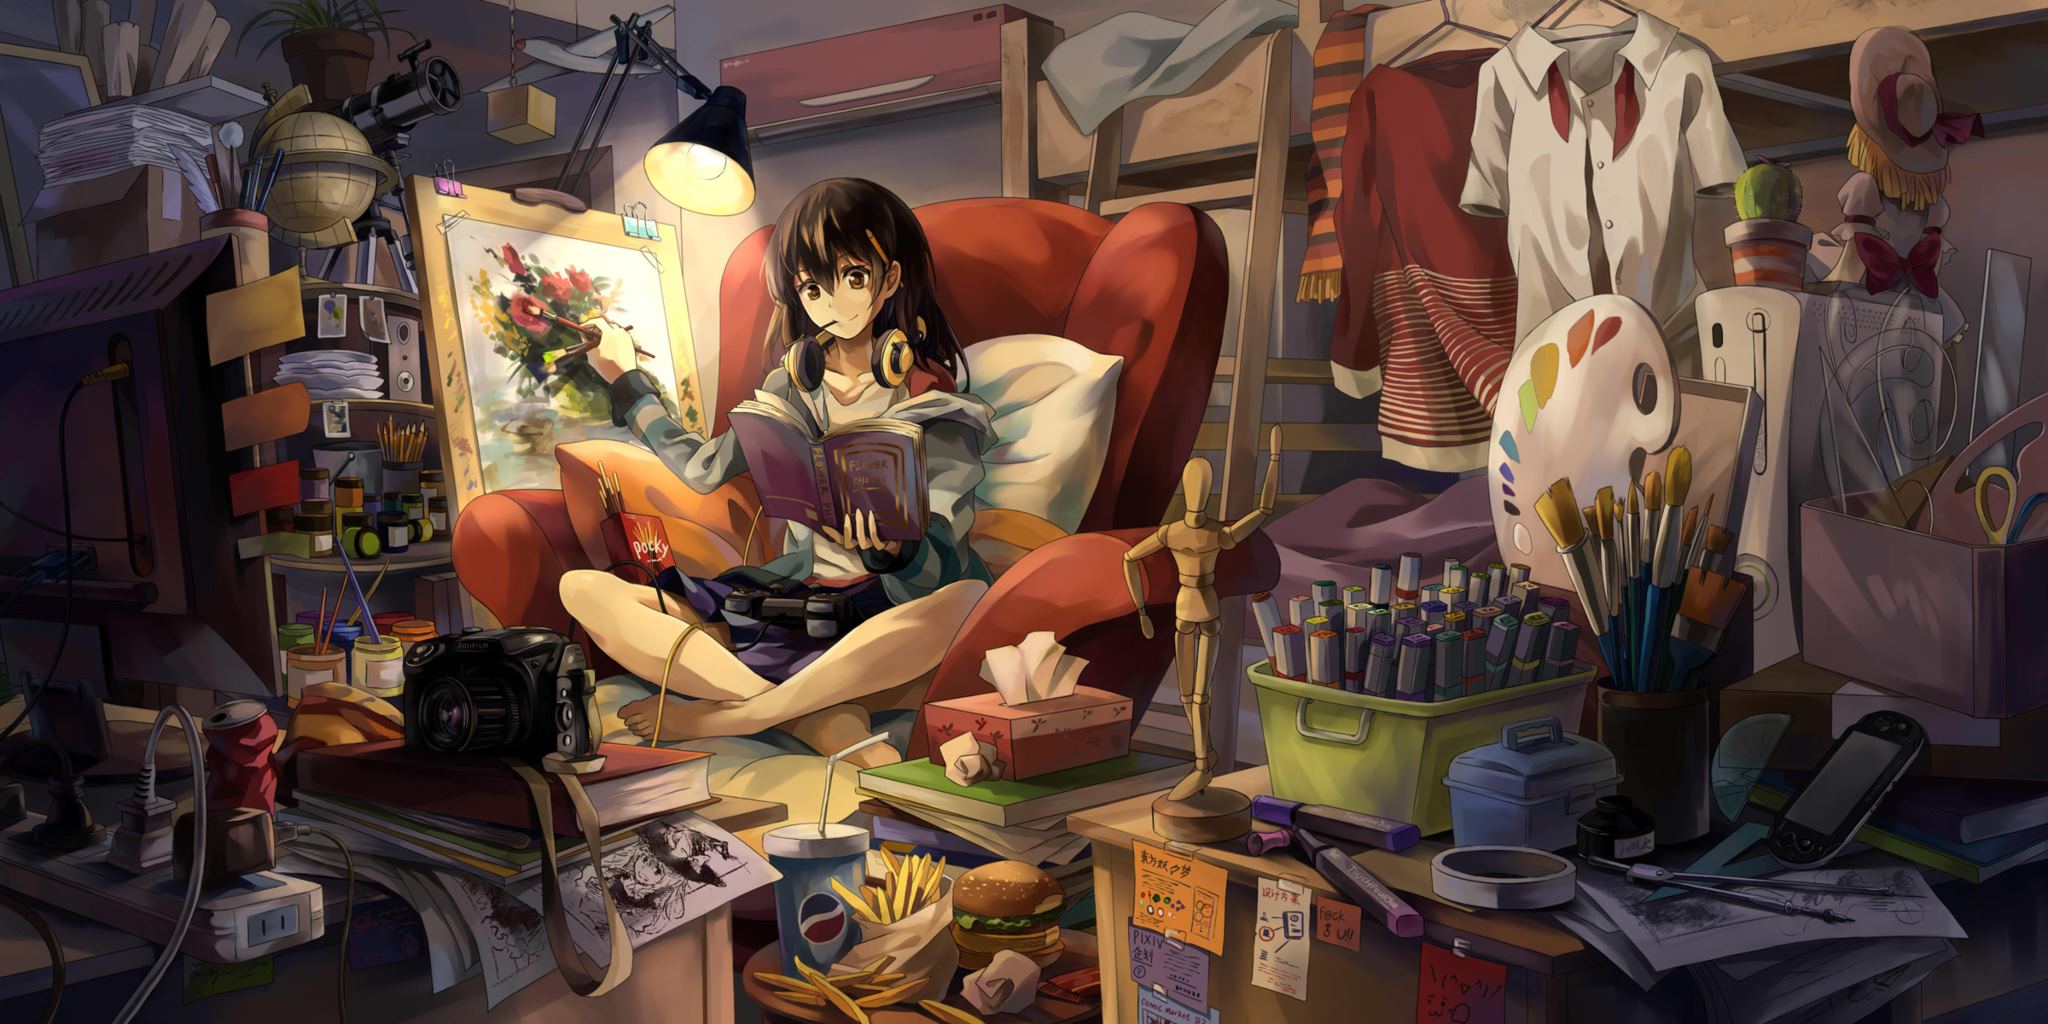 Room Anime Wallpapers - Wallpaper Cave